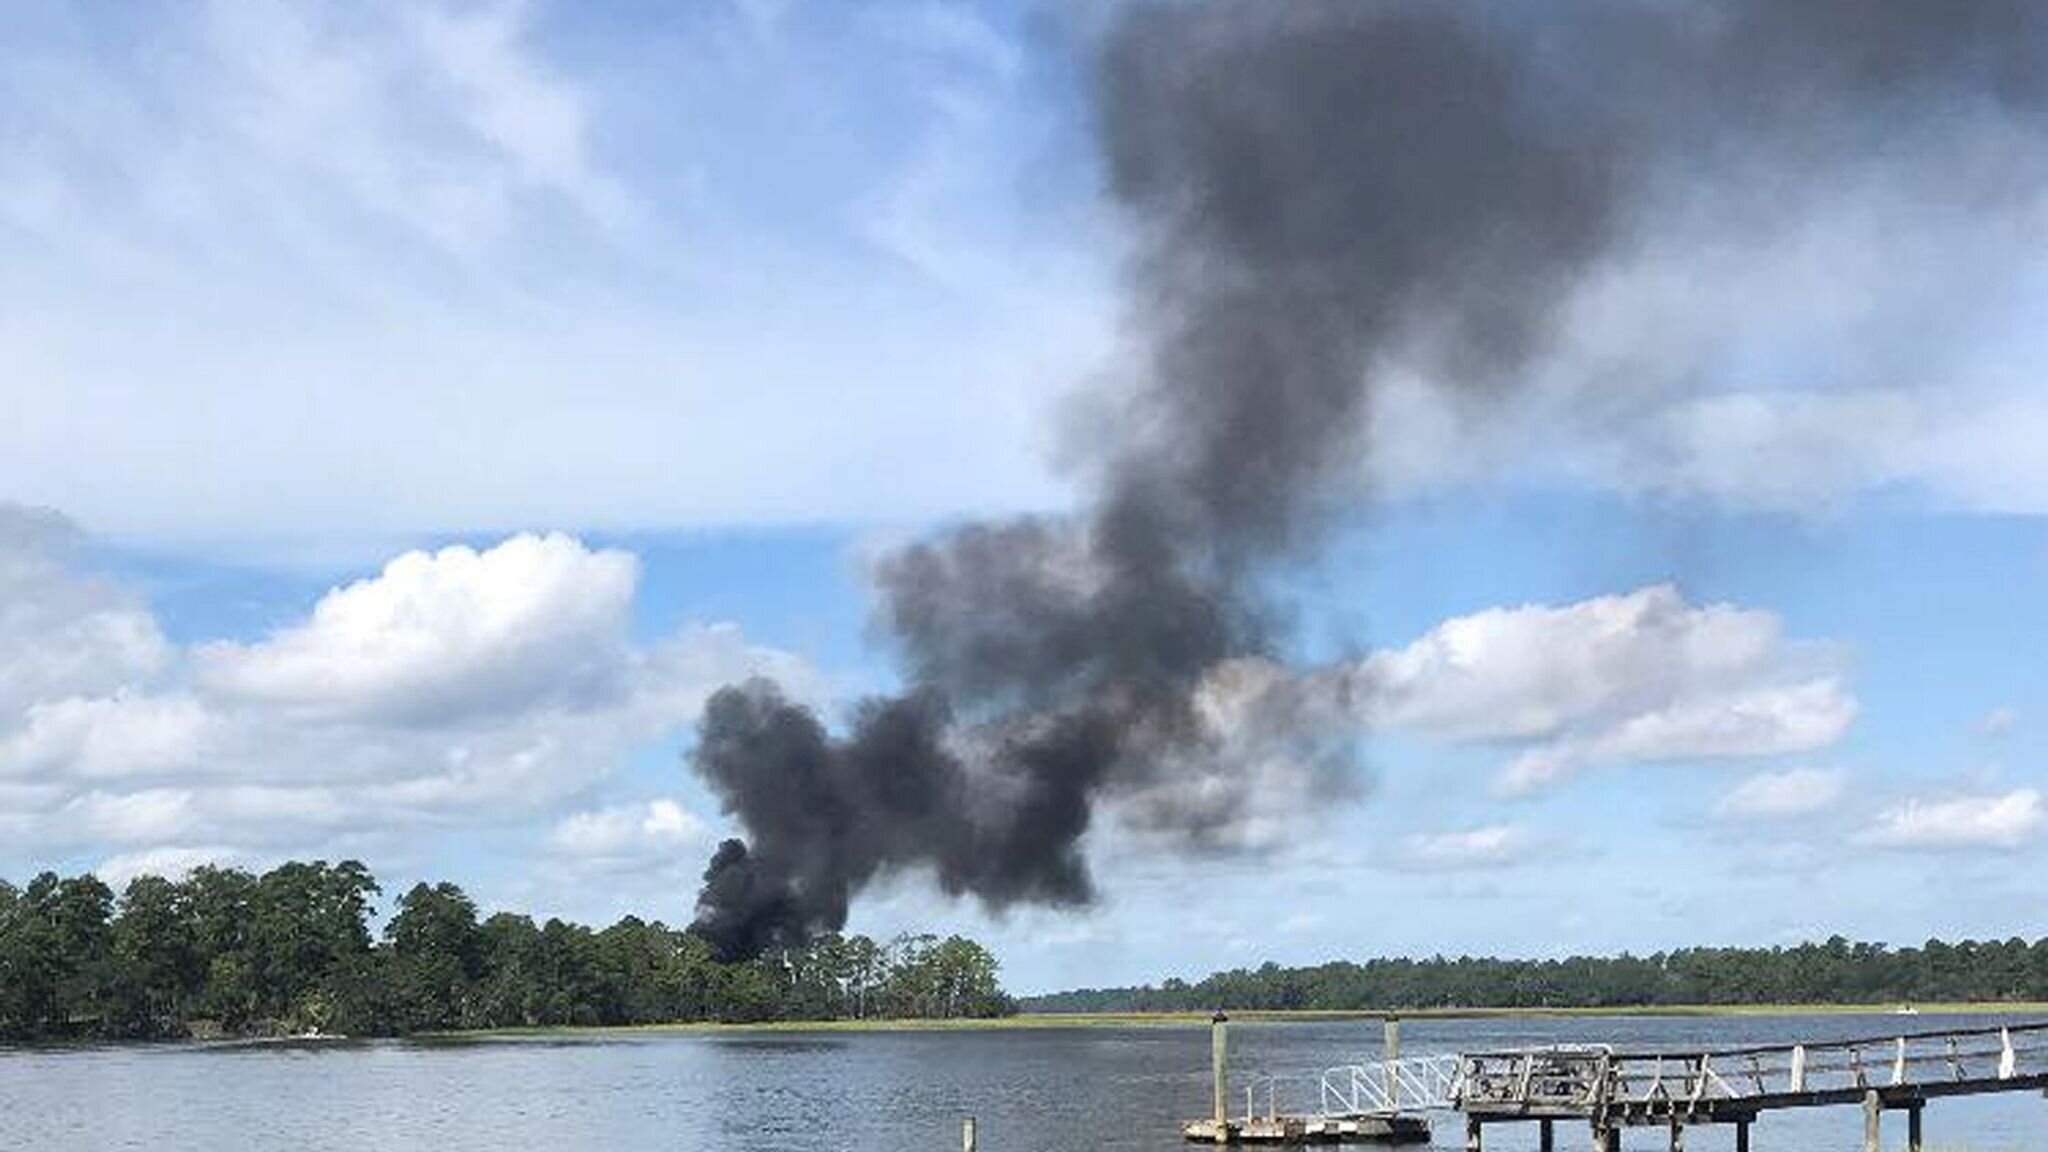 PICTURED: Smoke rises at the site of the F-35 jet crash in Beaufort, South Carolina. PC: Sky News.